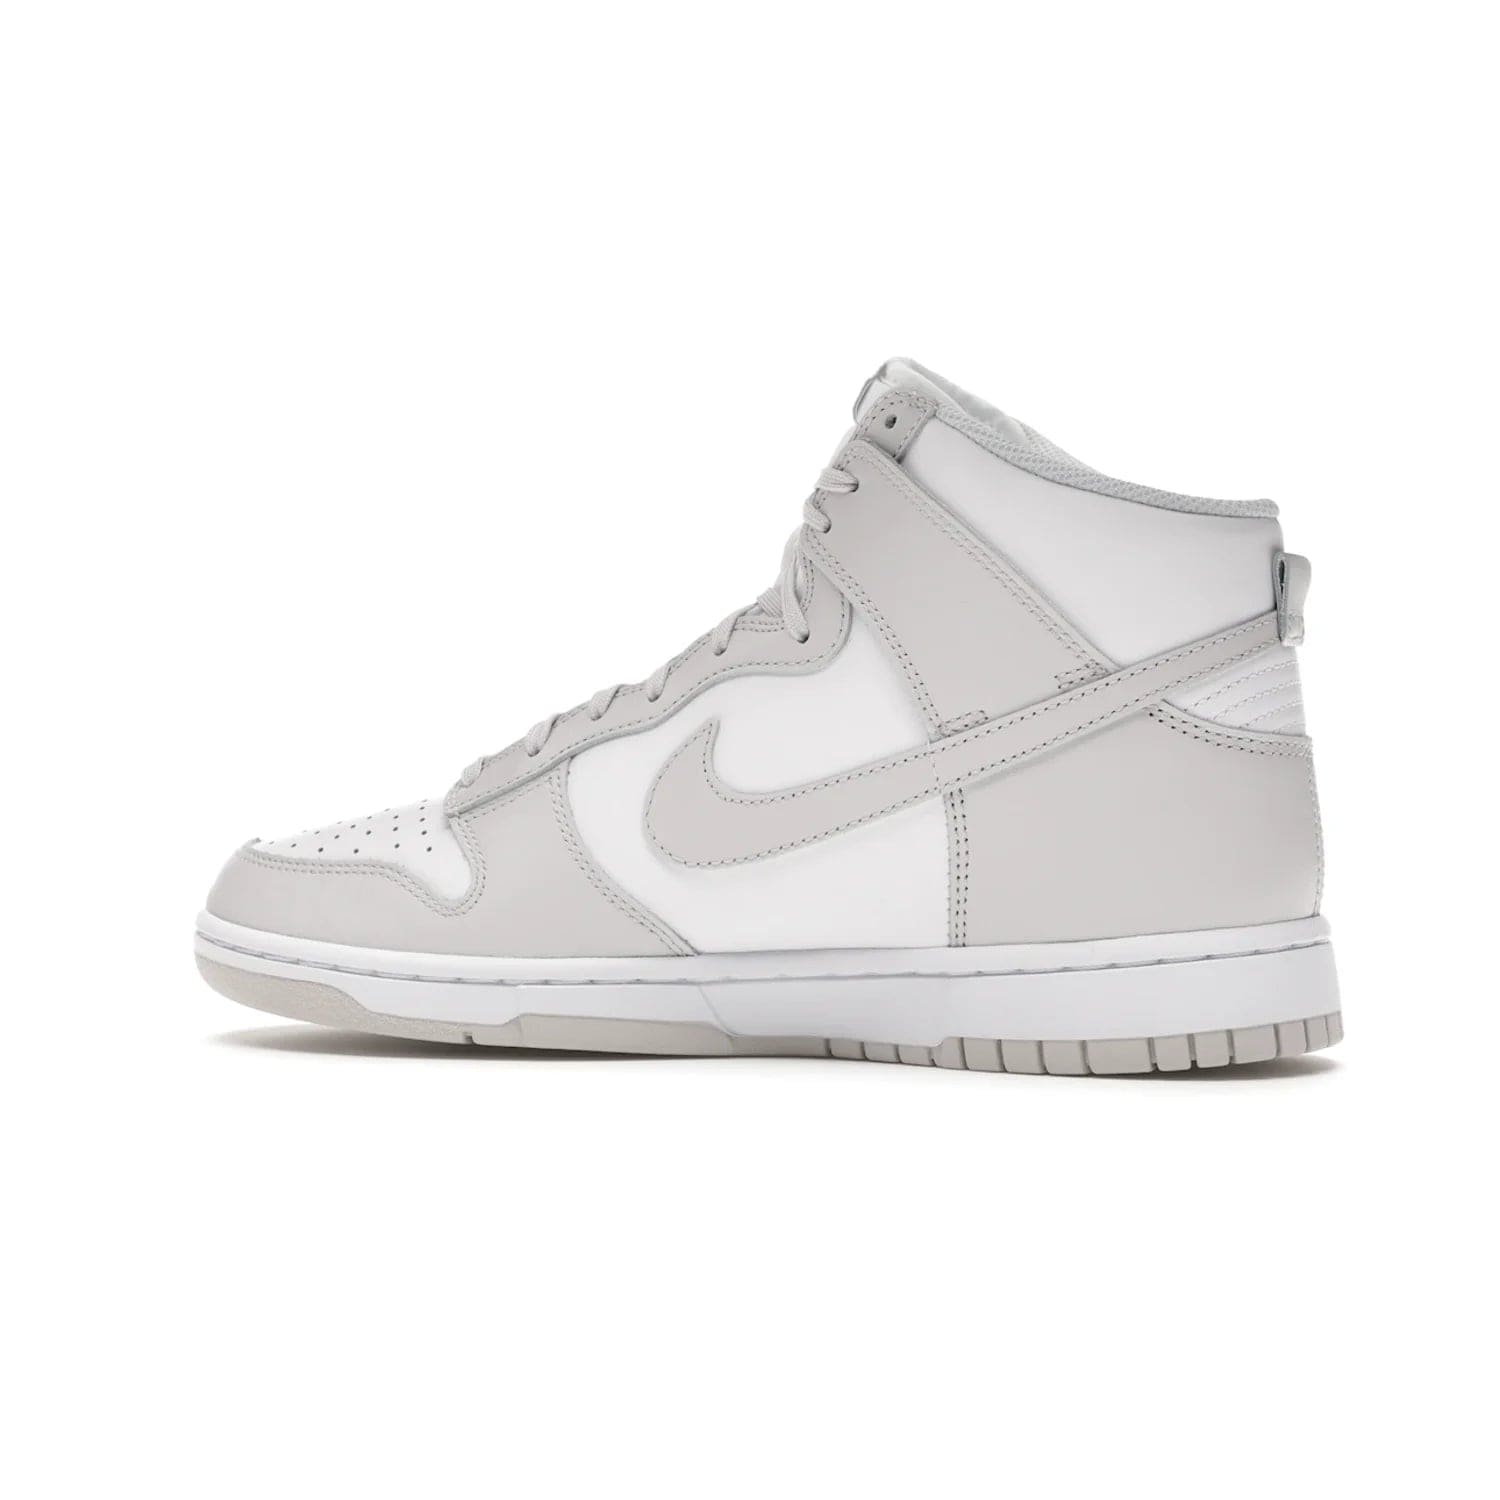 Nike Dunk High Retro White Vast Grey (2021) - Image 21 - Only at www.BallersClubKickz.com - Nike Dunk High Retro White Vast Grey 2021: classic '80s basketball sneaker with a crisp white base, grey overlays, midsole tooling and outsole. Dropped Feb. 2021.